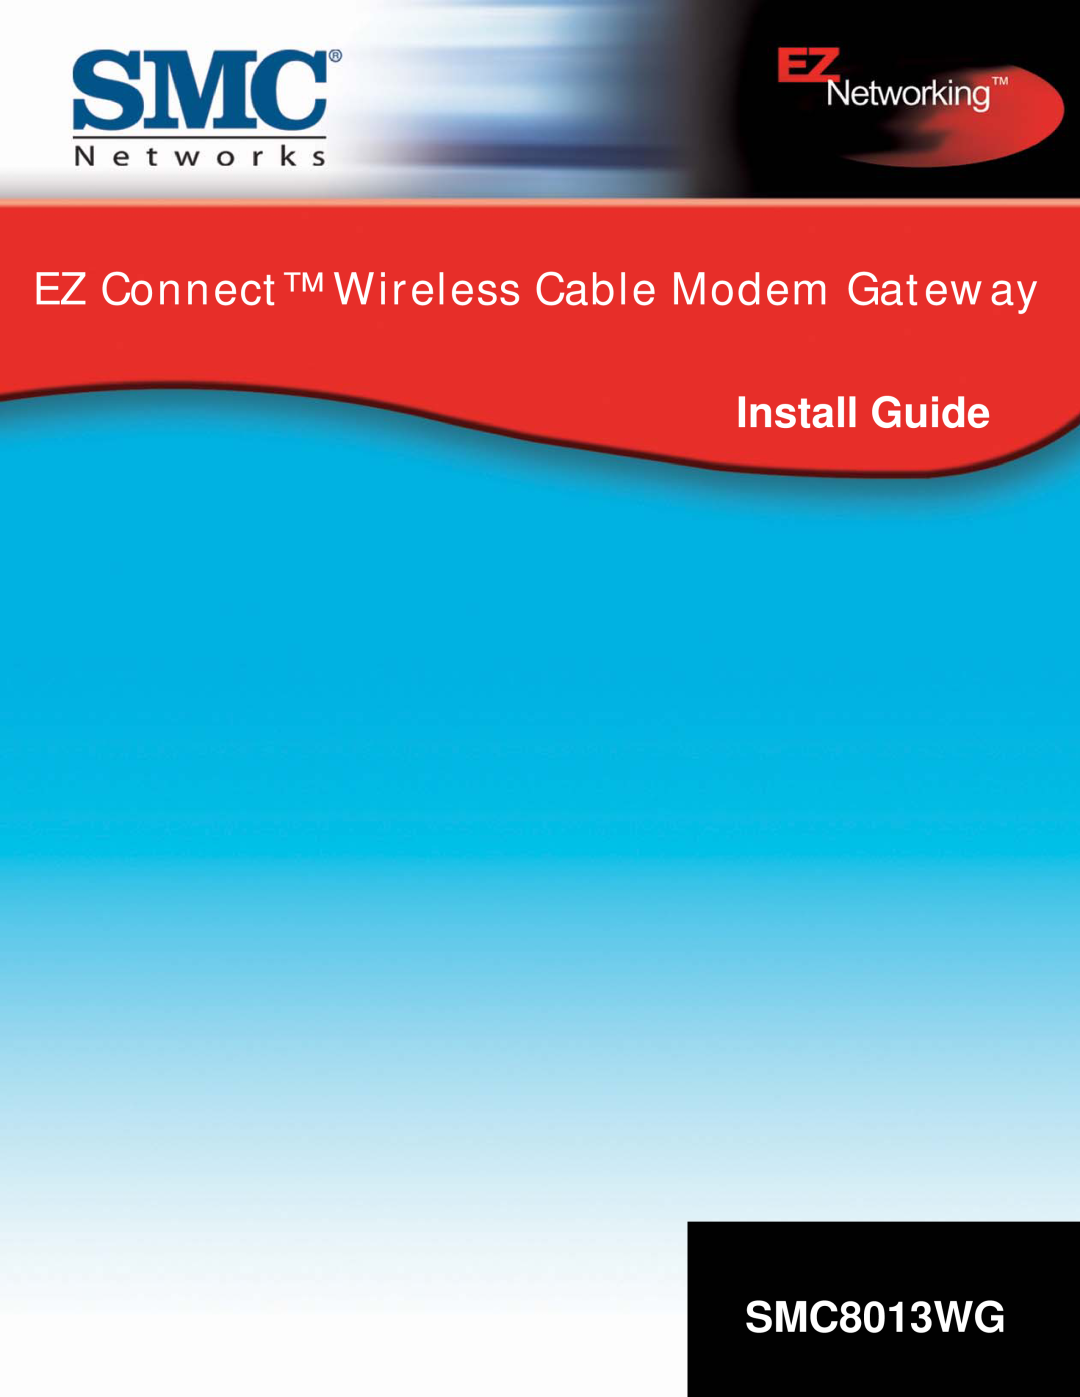 SMC Networks SMC8013WG manual Install Guide, EZ Connect Wireless Cable Modem Gateway 